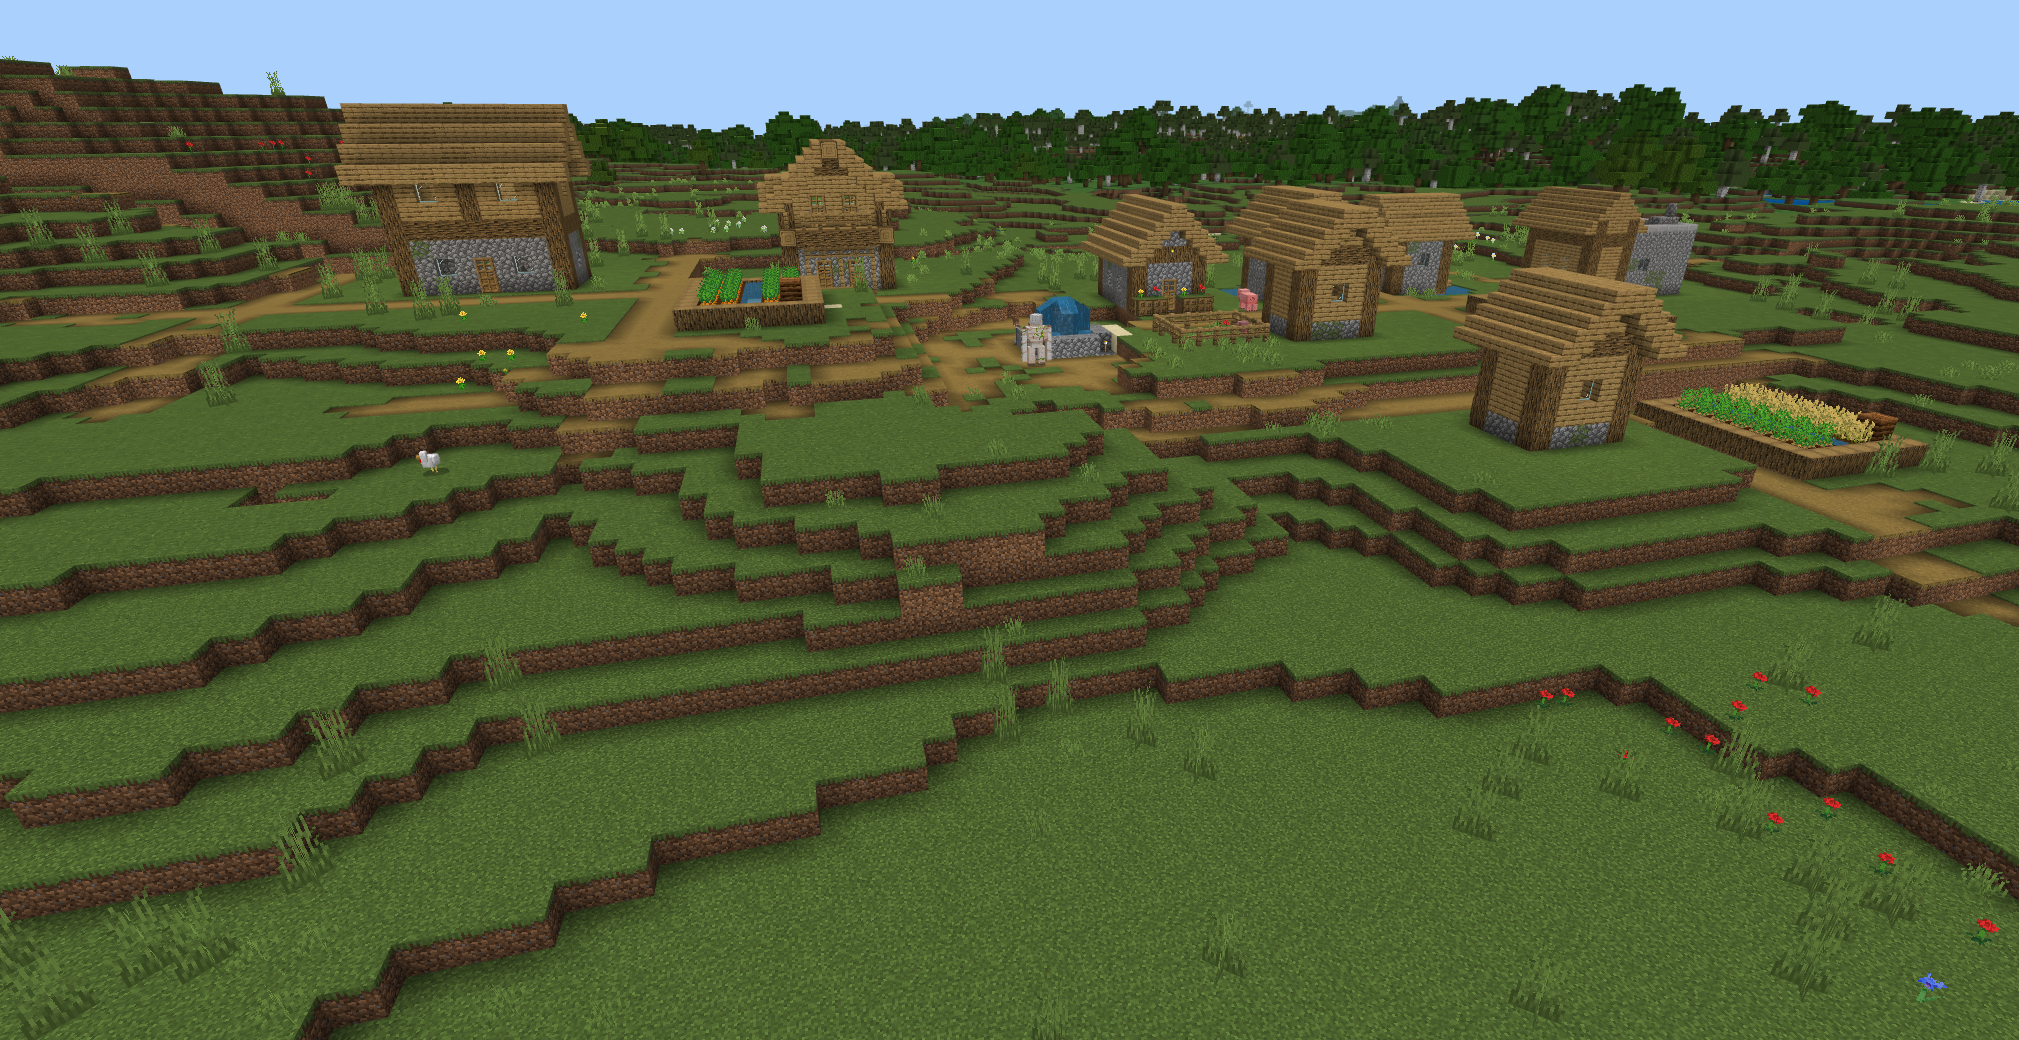 A simple village before anything is edited